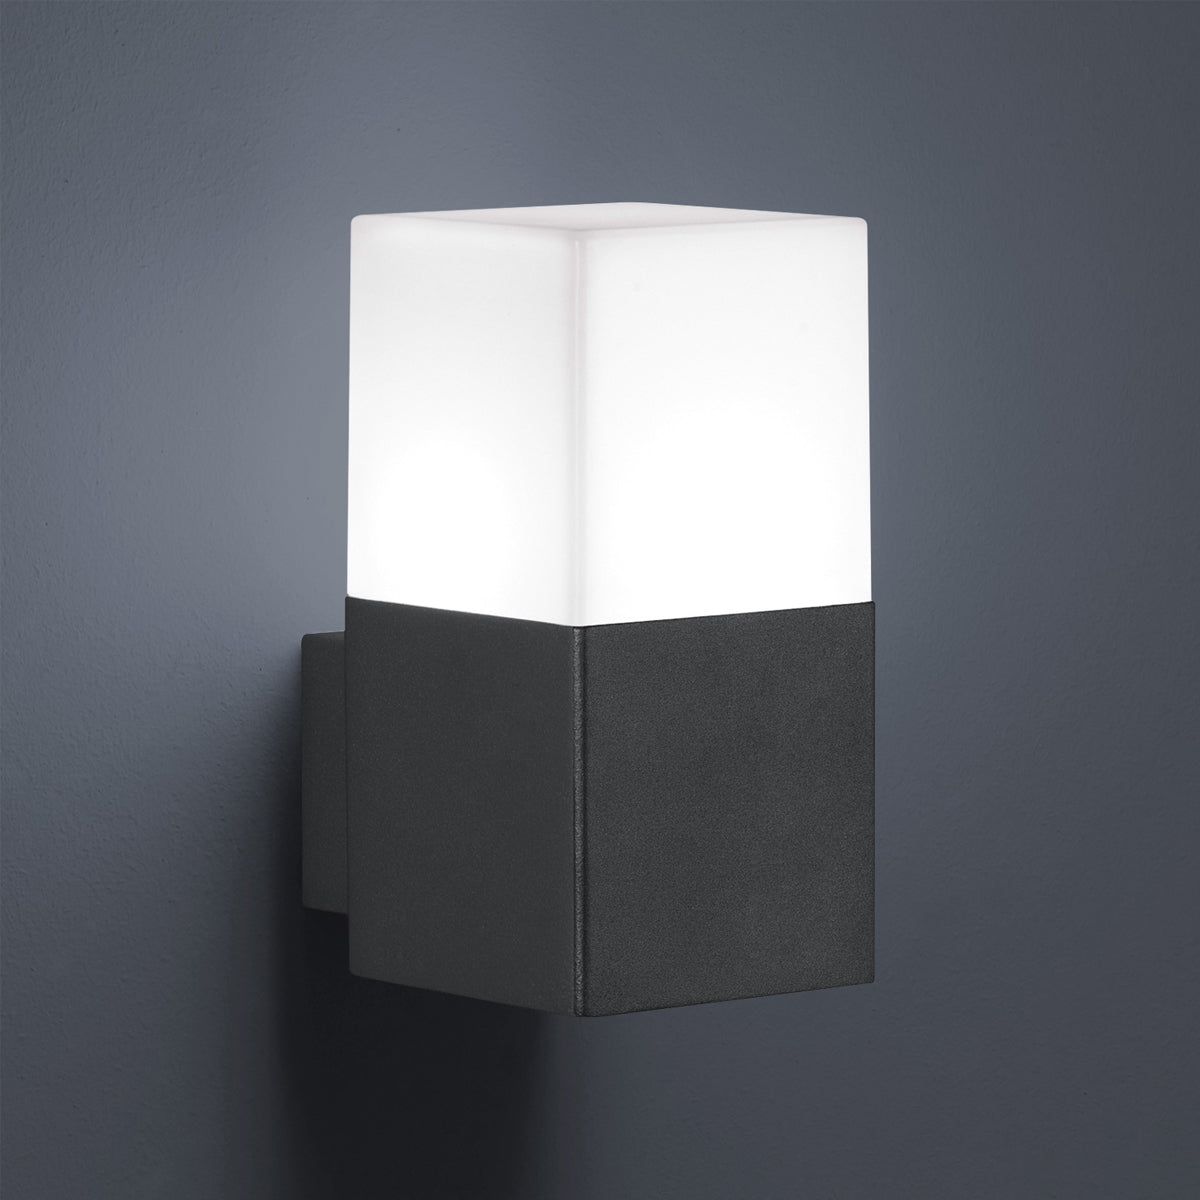 Our Amara dark grey outdoor wall mounted rectangle outdoor light would look perfect in a modern or more traditional home design. Outside wall lights can provide atmospheric light in your garden, at the front door or on the terrace as well as a great security solution. It is designed for durability and longevity with its robust material producing a fully weatherproof and water resistant light fitting.